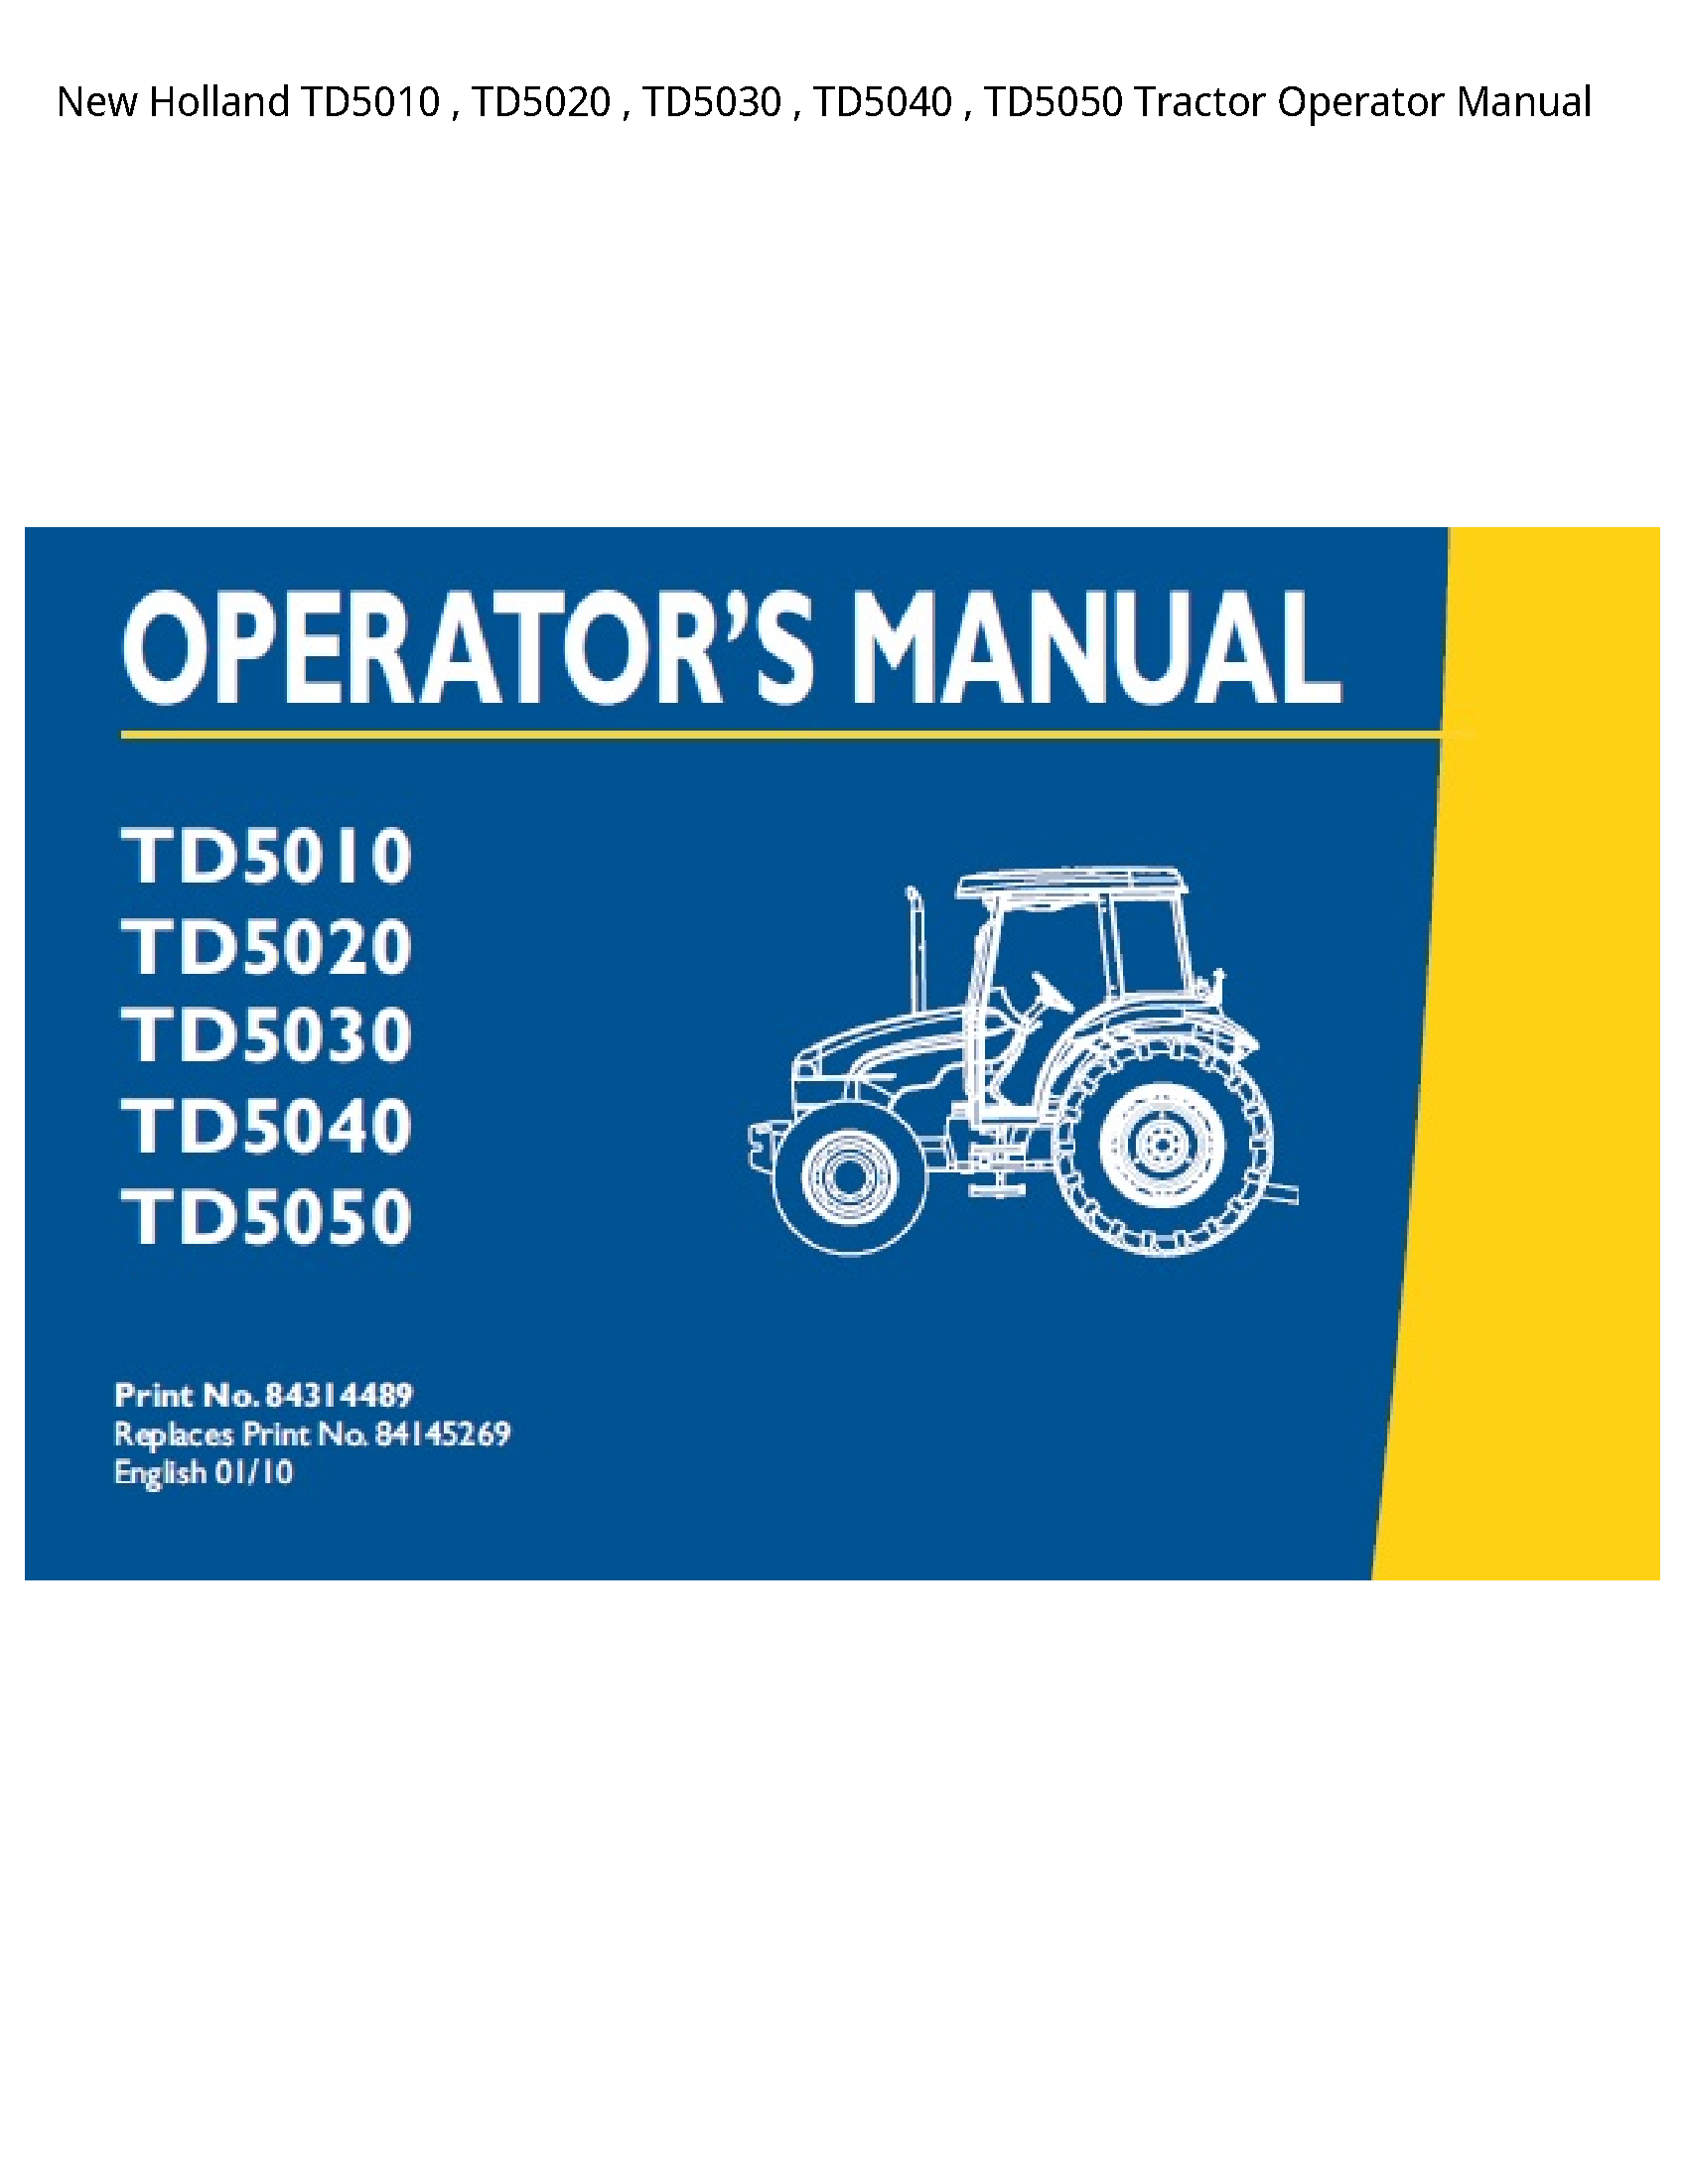 New Holland TD5010 Tractor Operator manual